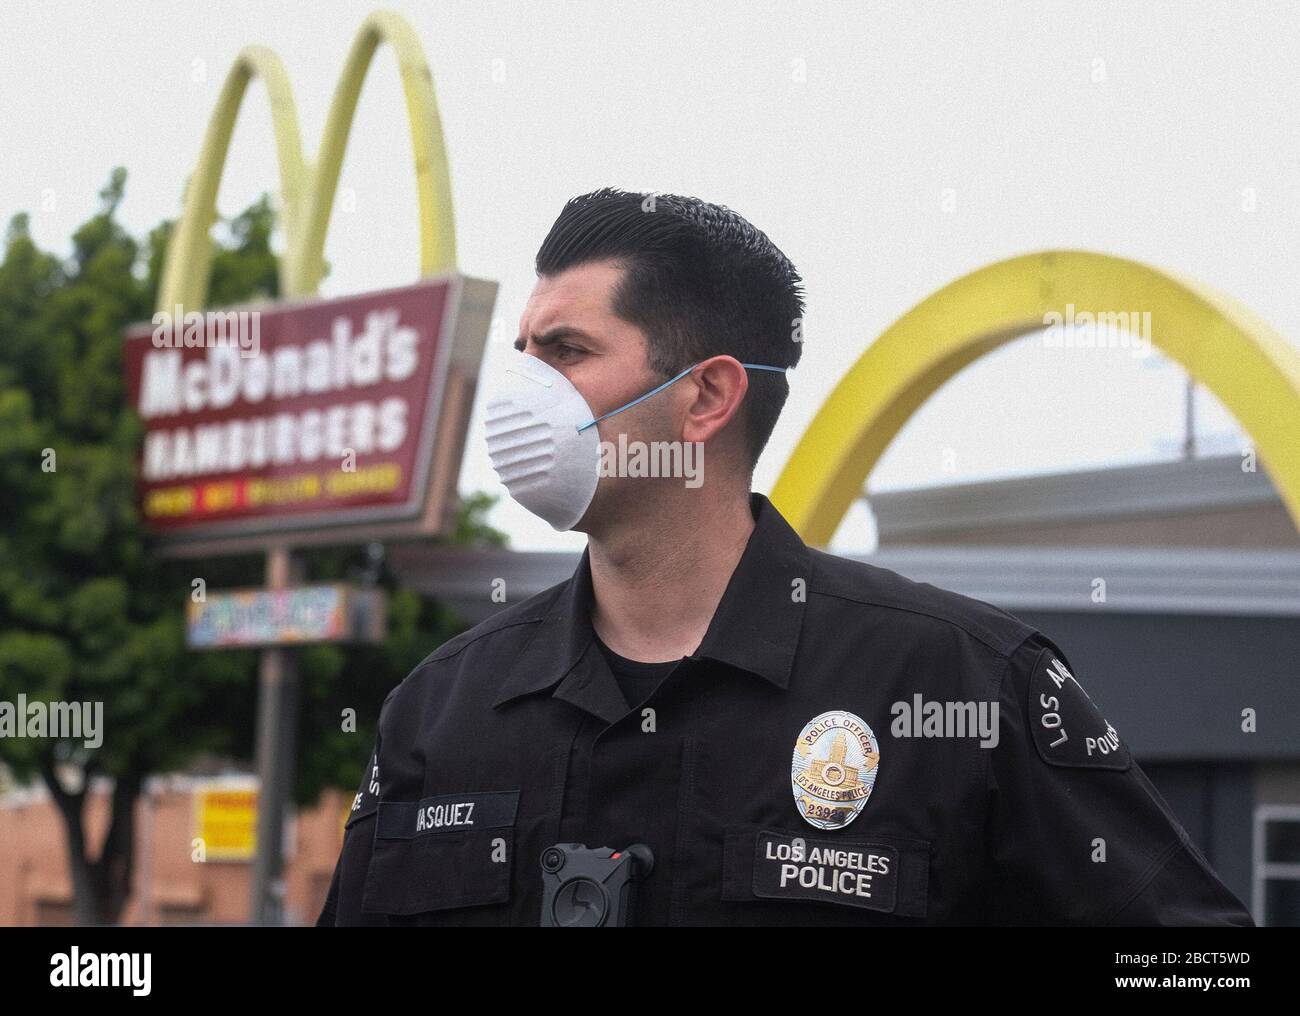 Los Angeles, California, USA. 5th Apr, 2020. A police officer wearing a face mask as workers take part in a drive-thru ''strike'' at a McDonald's restaurant on Sunday, April 5, 2020 in Los Angeles. The workers are demanding a two-week quarantine period, with full pay for a co-worker who tested positive for COVID-19. Credit: Ringo Chiu/ZUMA Wire/Alamy Live News Stock Photo